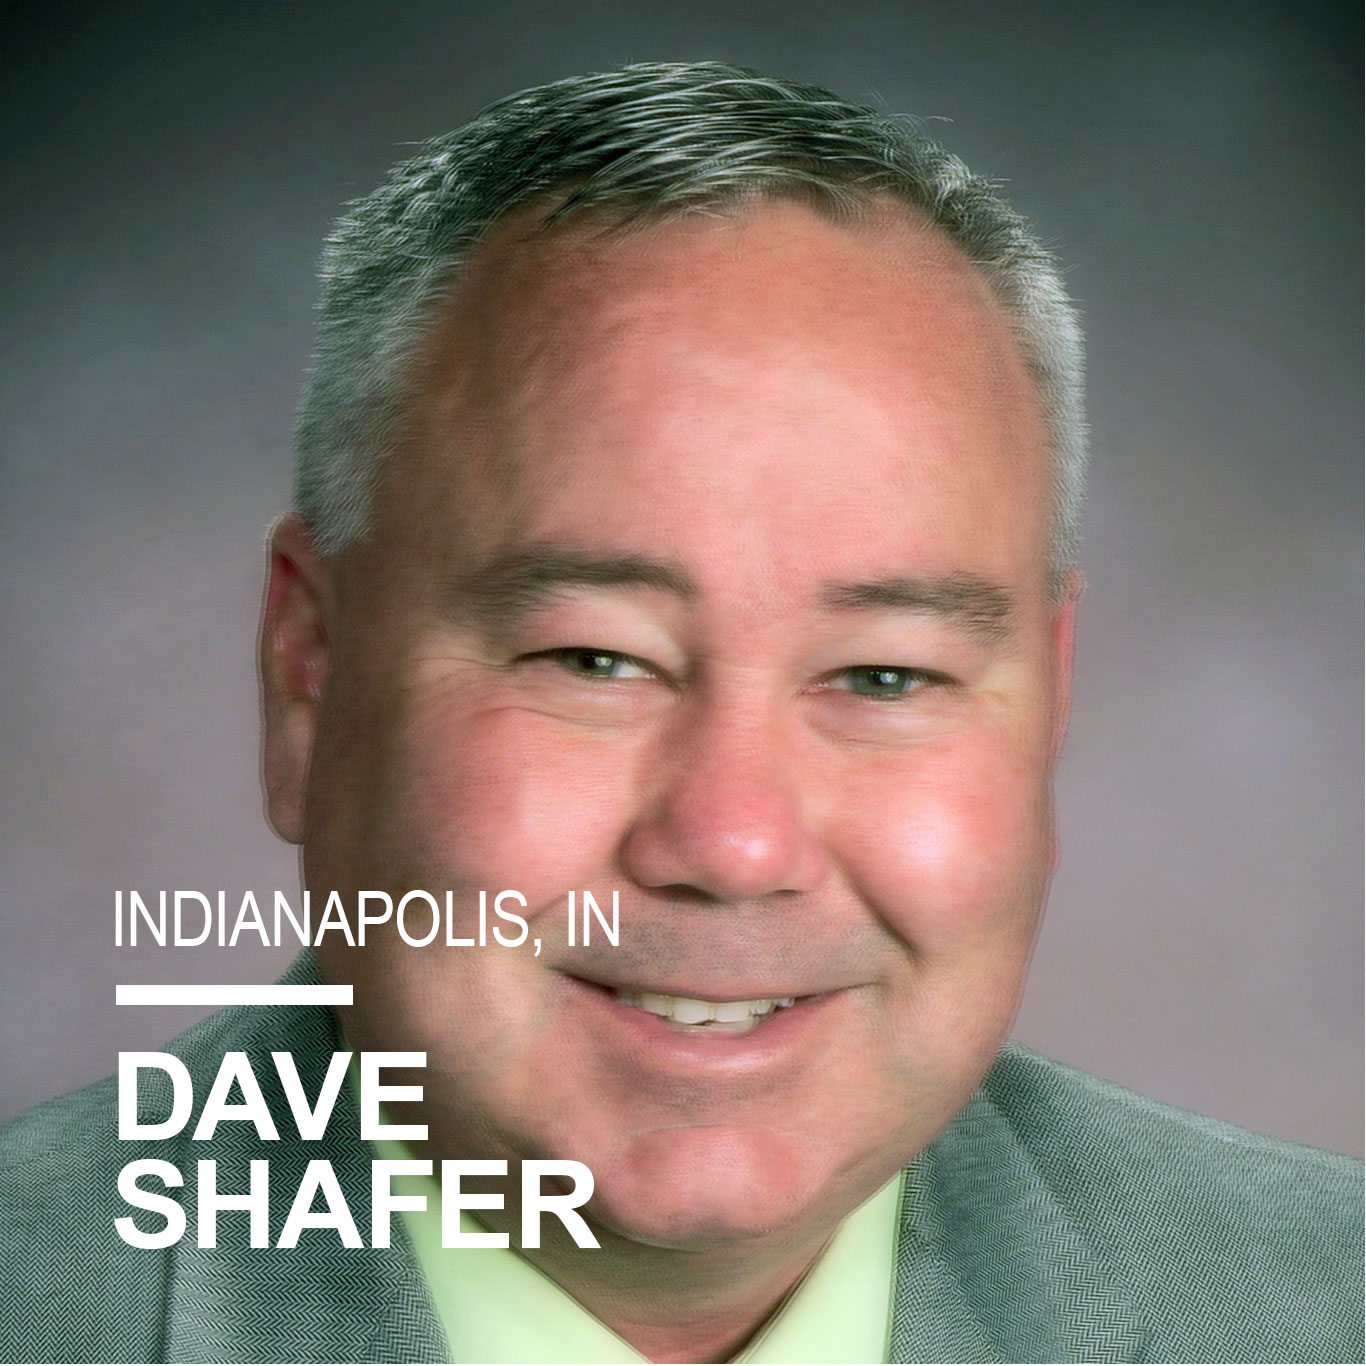 Dave Shafer is the STEM teacher for Grades Pre-K-6 at the Skiles Test School of STEM in Indianapolis, IN. He is the eCoach STEM specialist and the science fair coordinator. He also coordinates the school’s six-acre outdoor lab. Dave became a teacher because he wanted to see students who struggle in traditional school settings be successful and feel valued. He is passionate about equity in education and believes all students deserve the best that we can offer. Dave has been in education for 33 years, 13 of those as a STEM specialist.